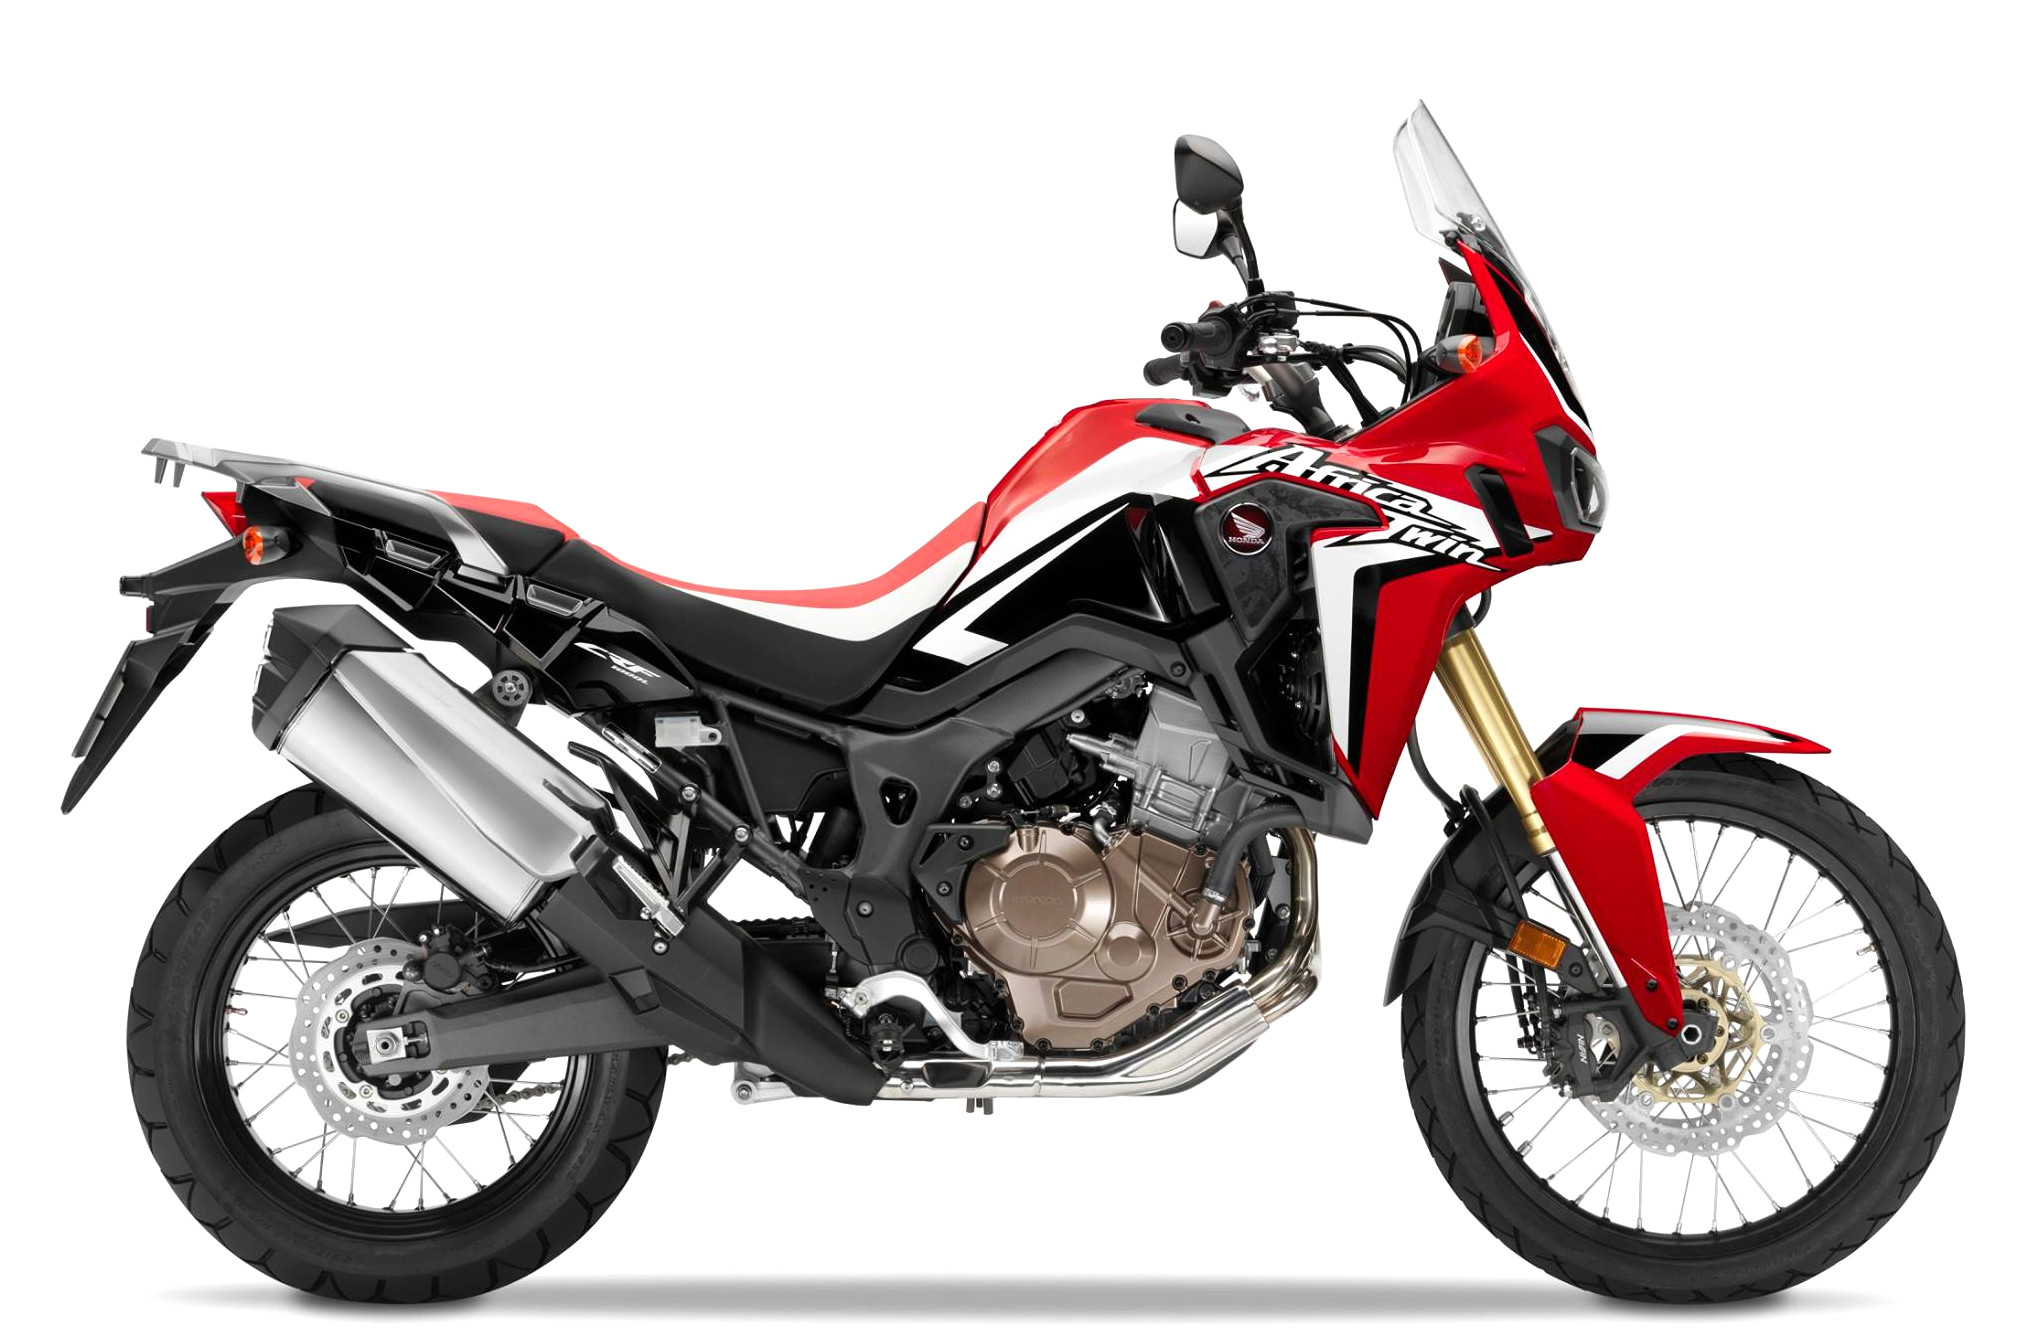 CRF 1000 AG Africa Twin (ABS)